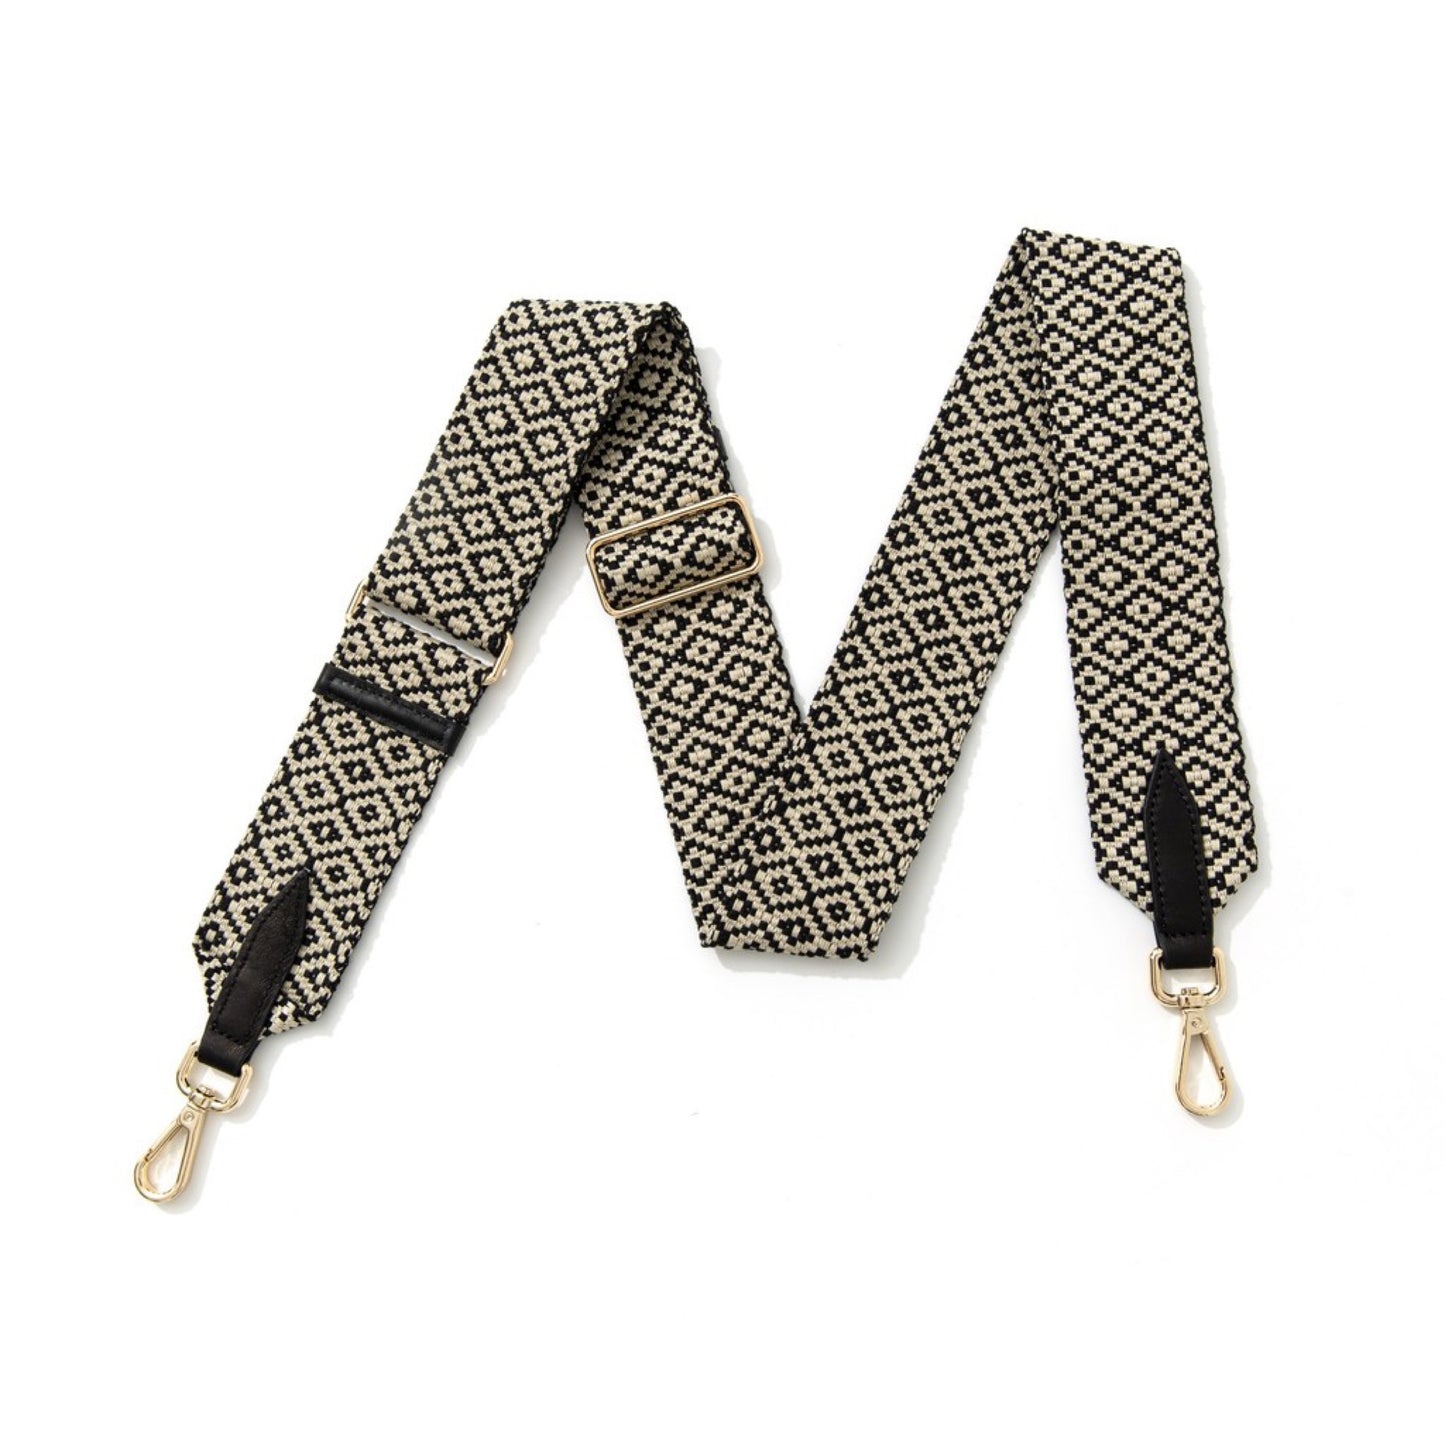 Black and beige abstract bag strap